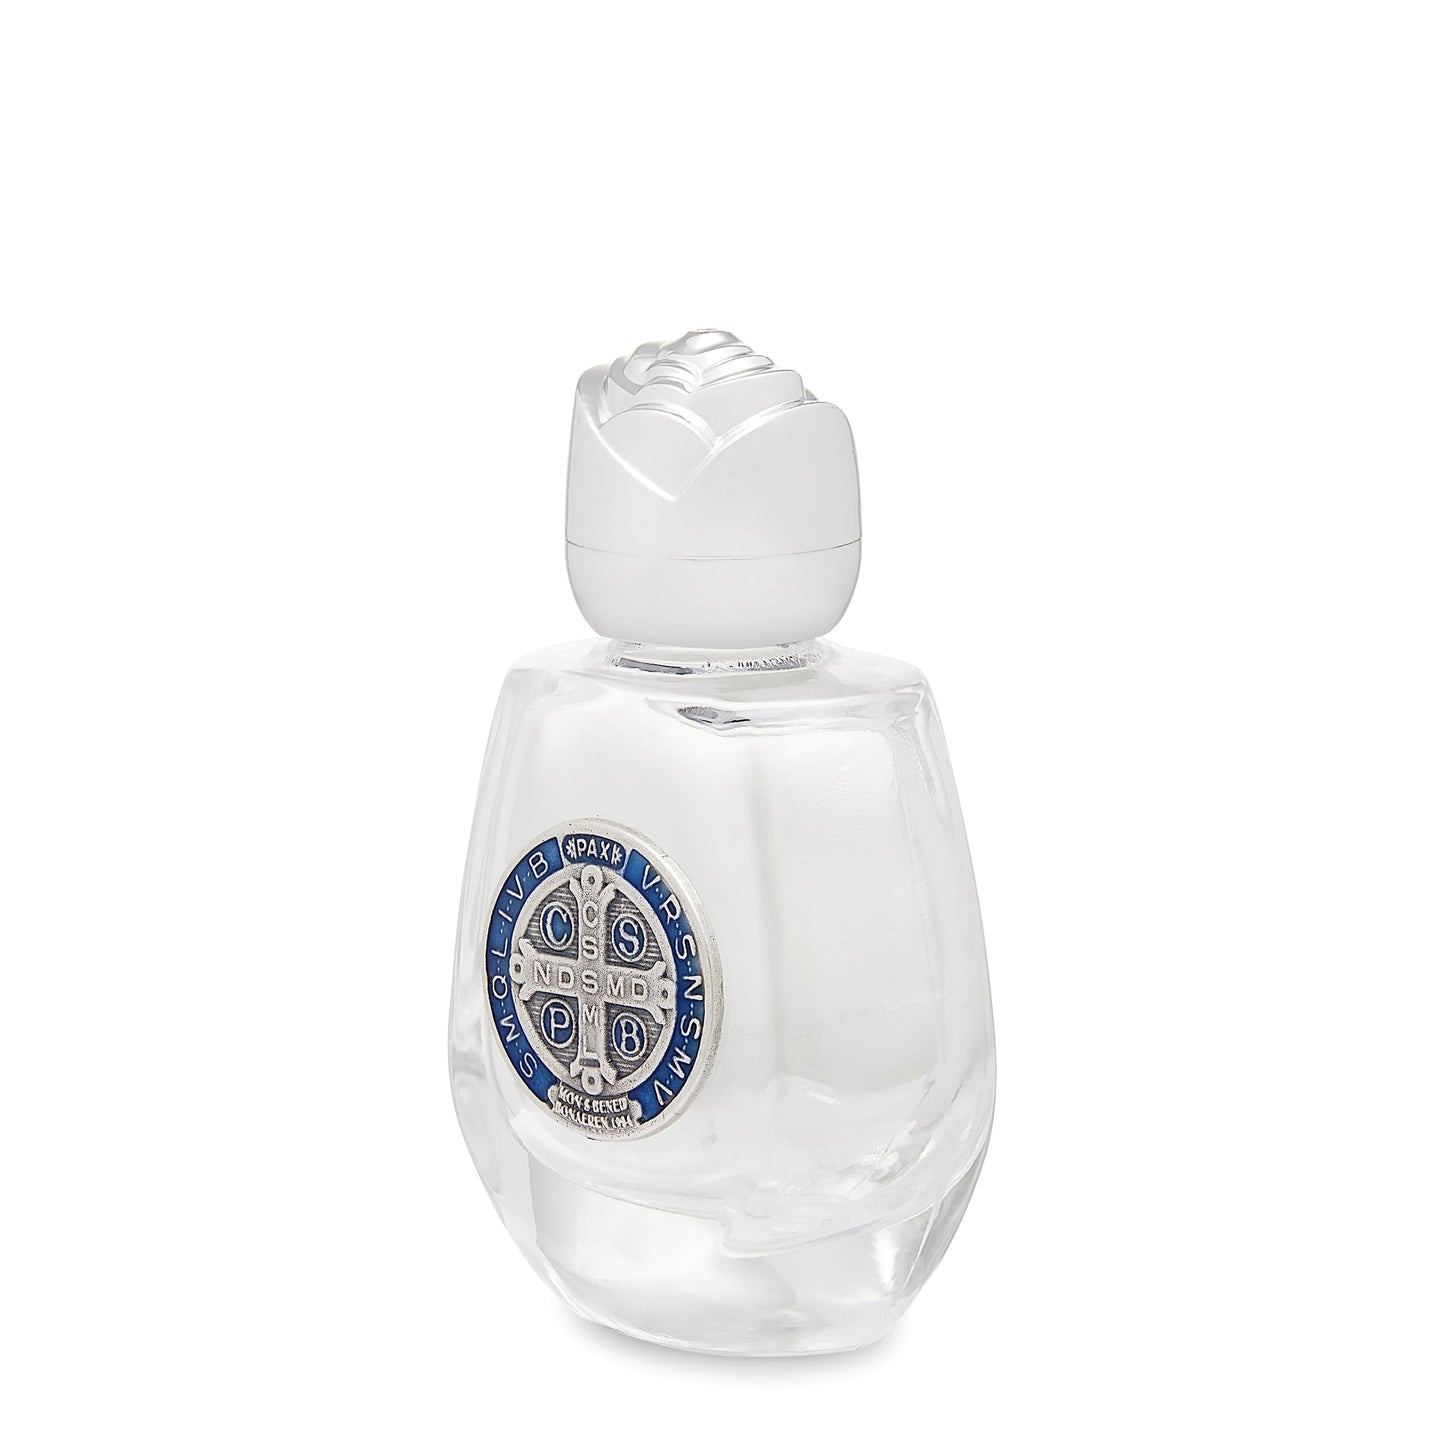 MONDO CATTOLICO Bottle of 10 ml. with St. Benedict Cross